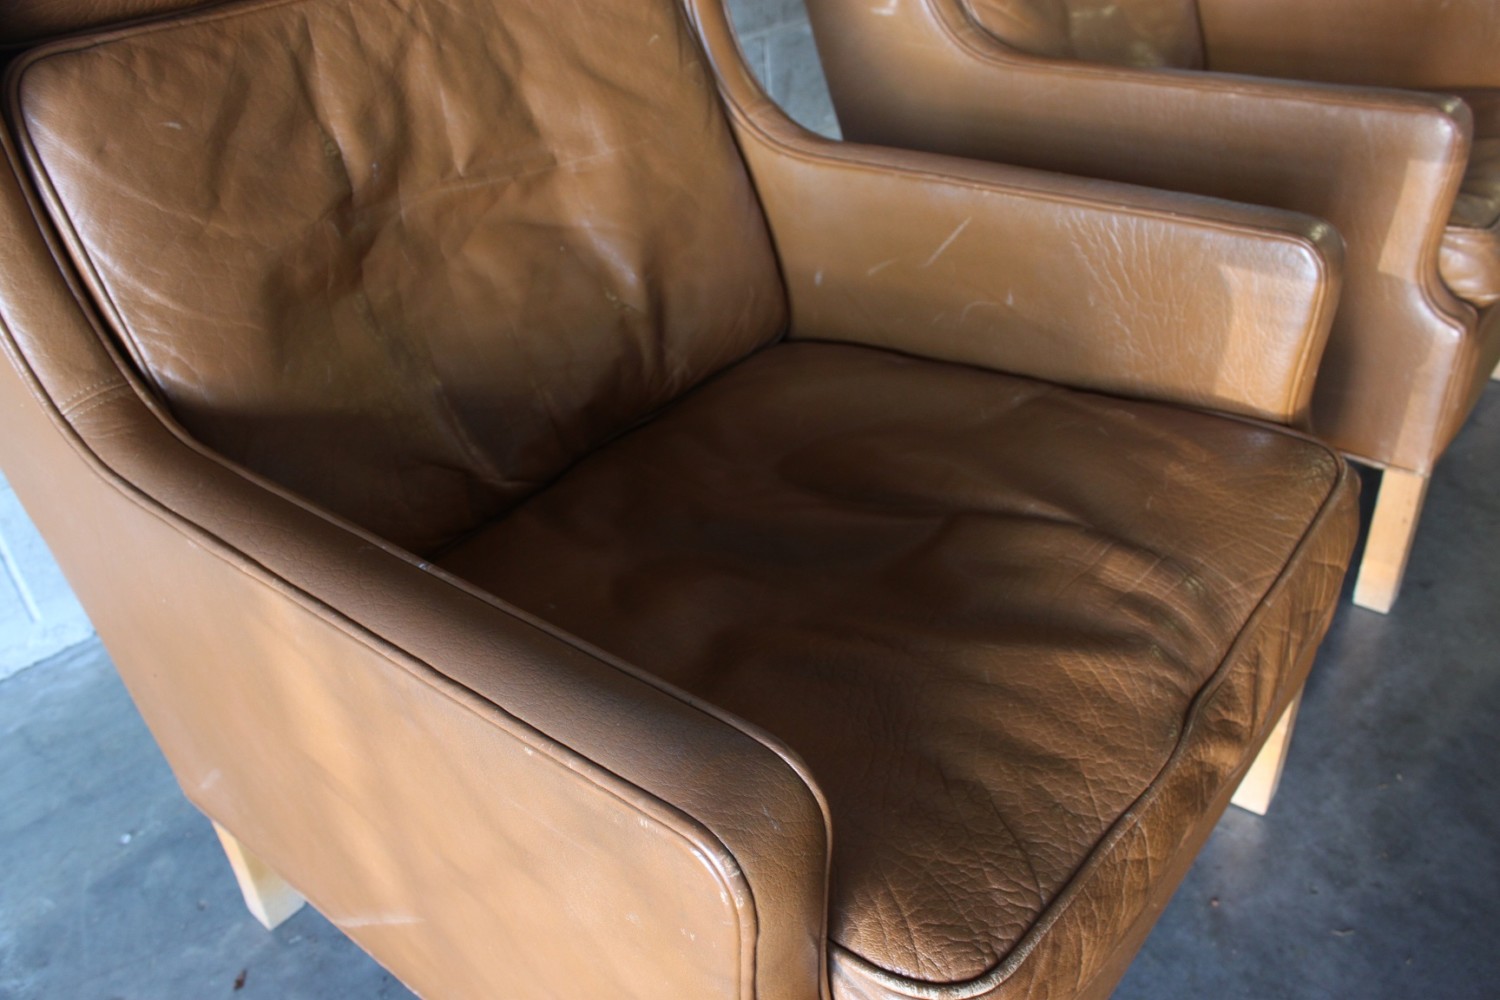 Pair of Leather Wing Back Armchairs